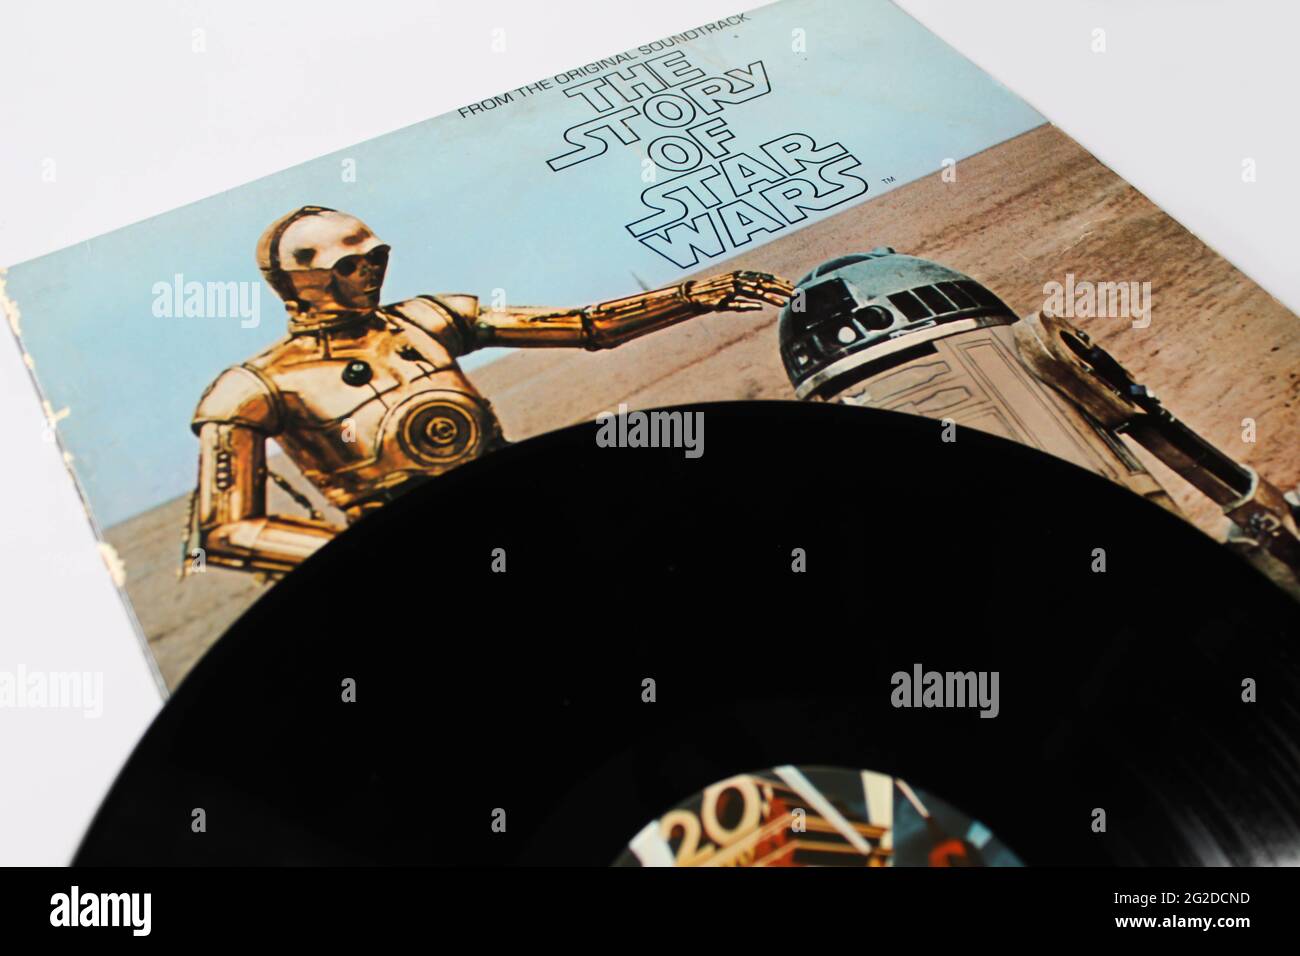 The Story of Star Wars a 1977 record album of the events depicted in the film Star Wars. Produced by George Lucas and Alan Livingston. Album cover Stock Photo